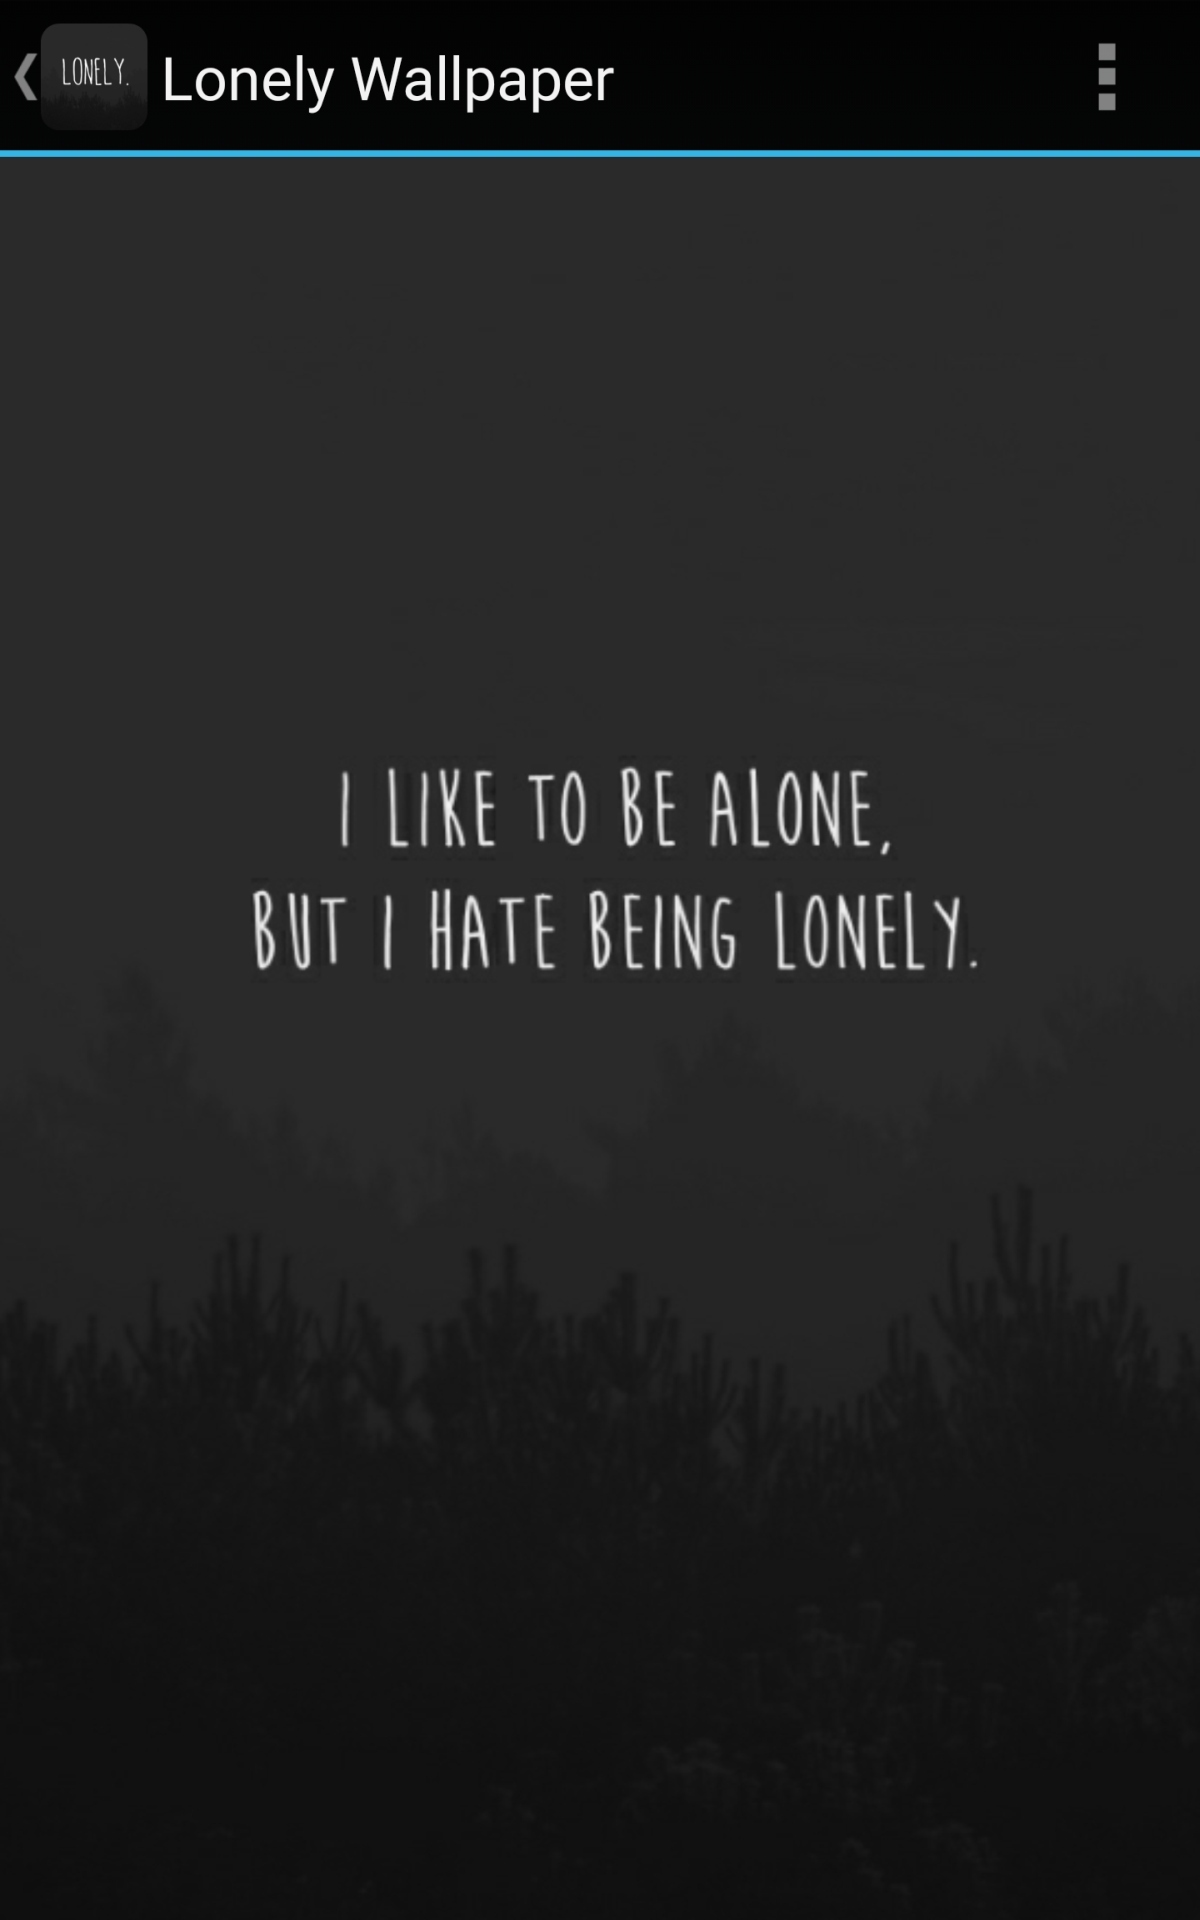 Being Alone - HD Wallpaper 